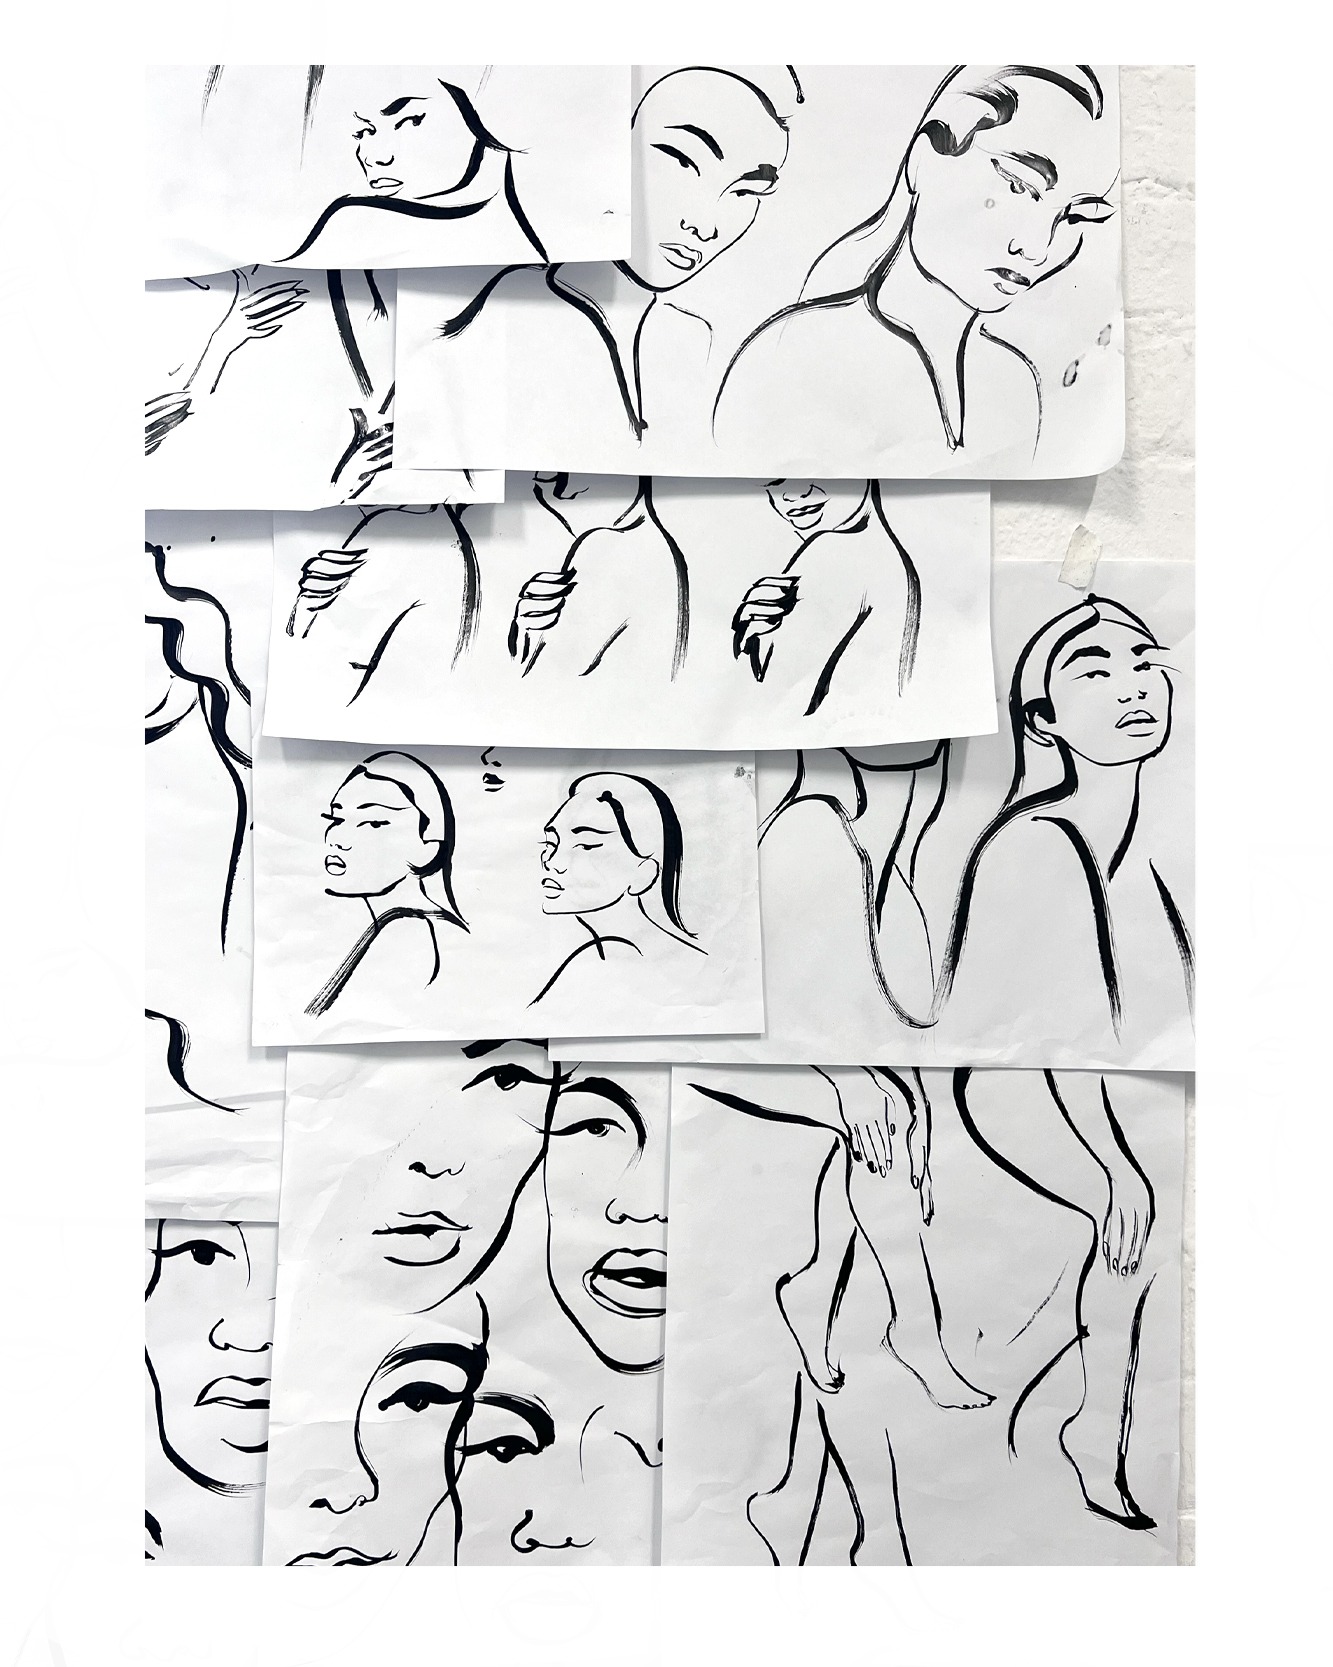 Beauty illustration work in progress on the studio wall. Sketches and papers on the studio wall  - black brush strokes for Olay brand. Body and  face and inky brush strokes style. Iconography illustrations, graphics minimal brushstrokes.